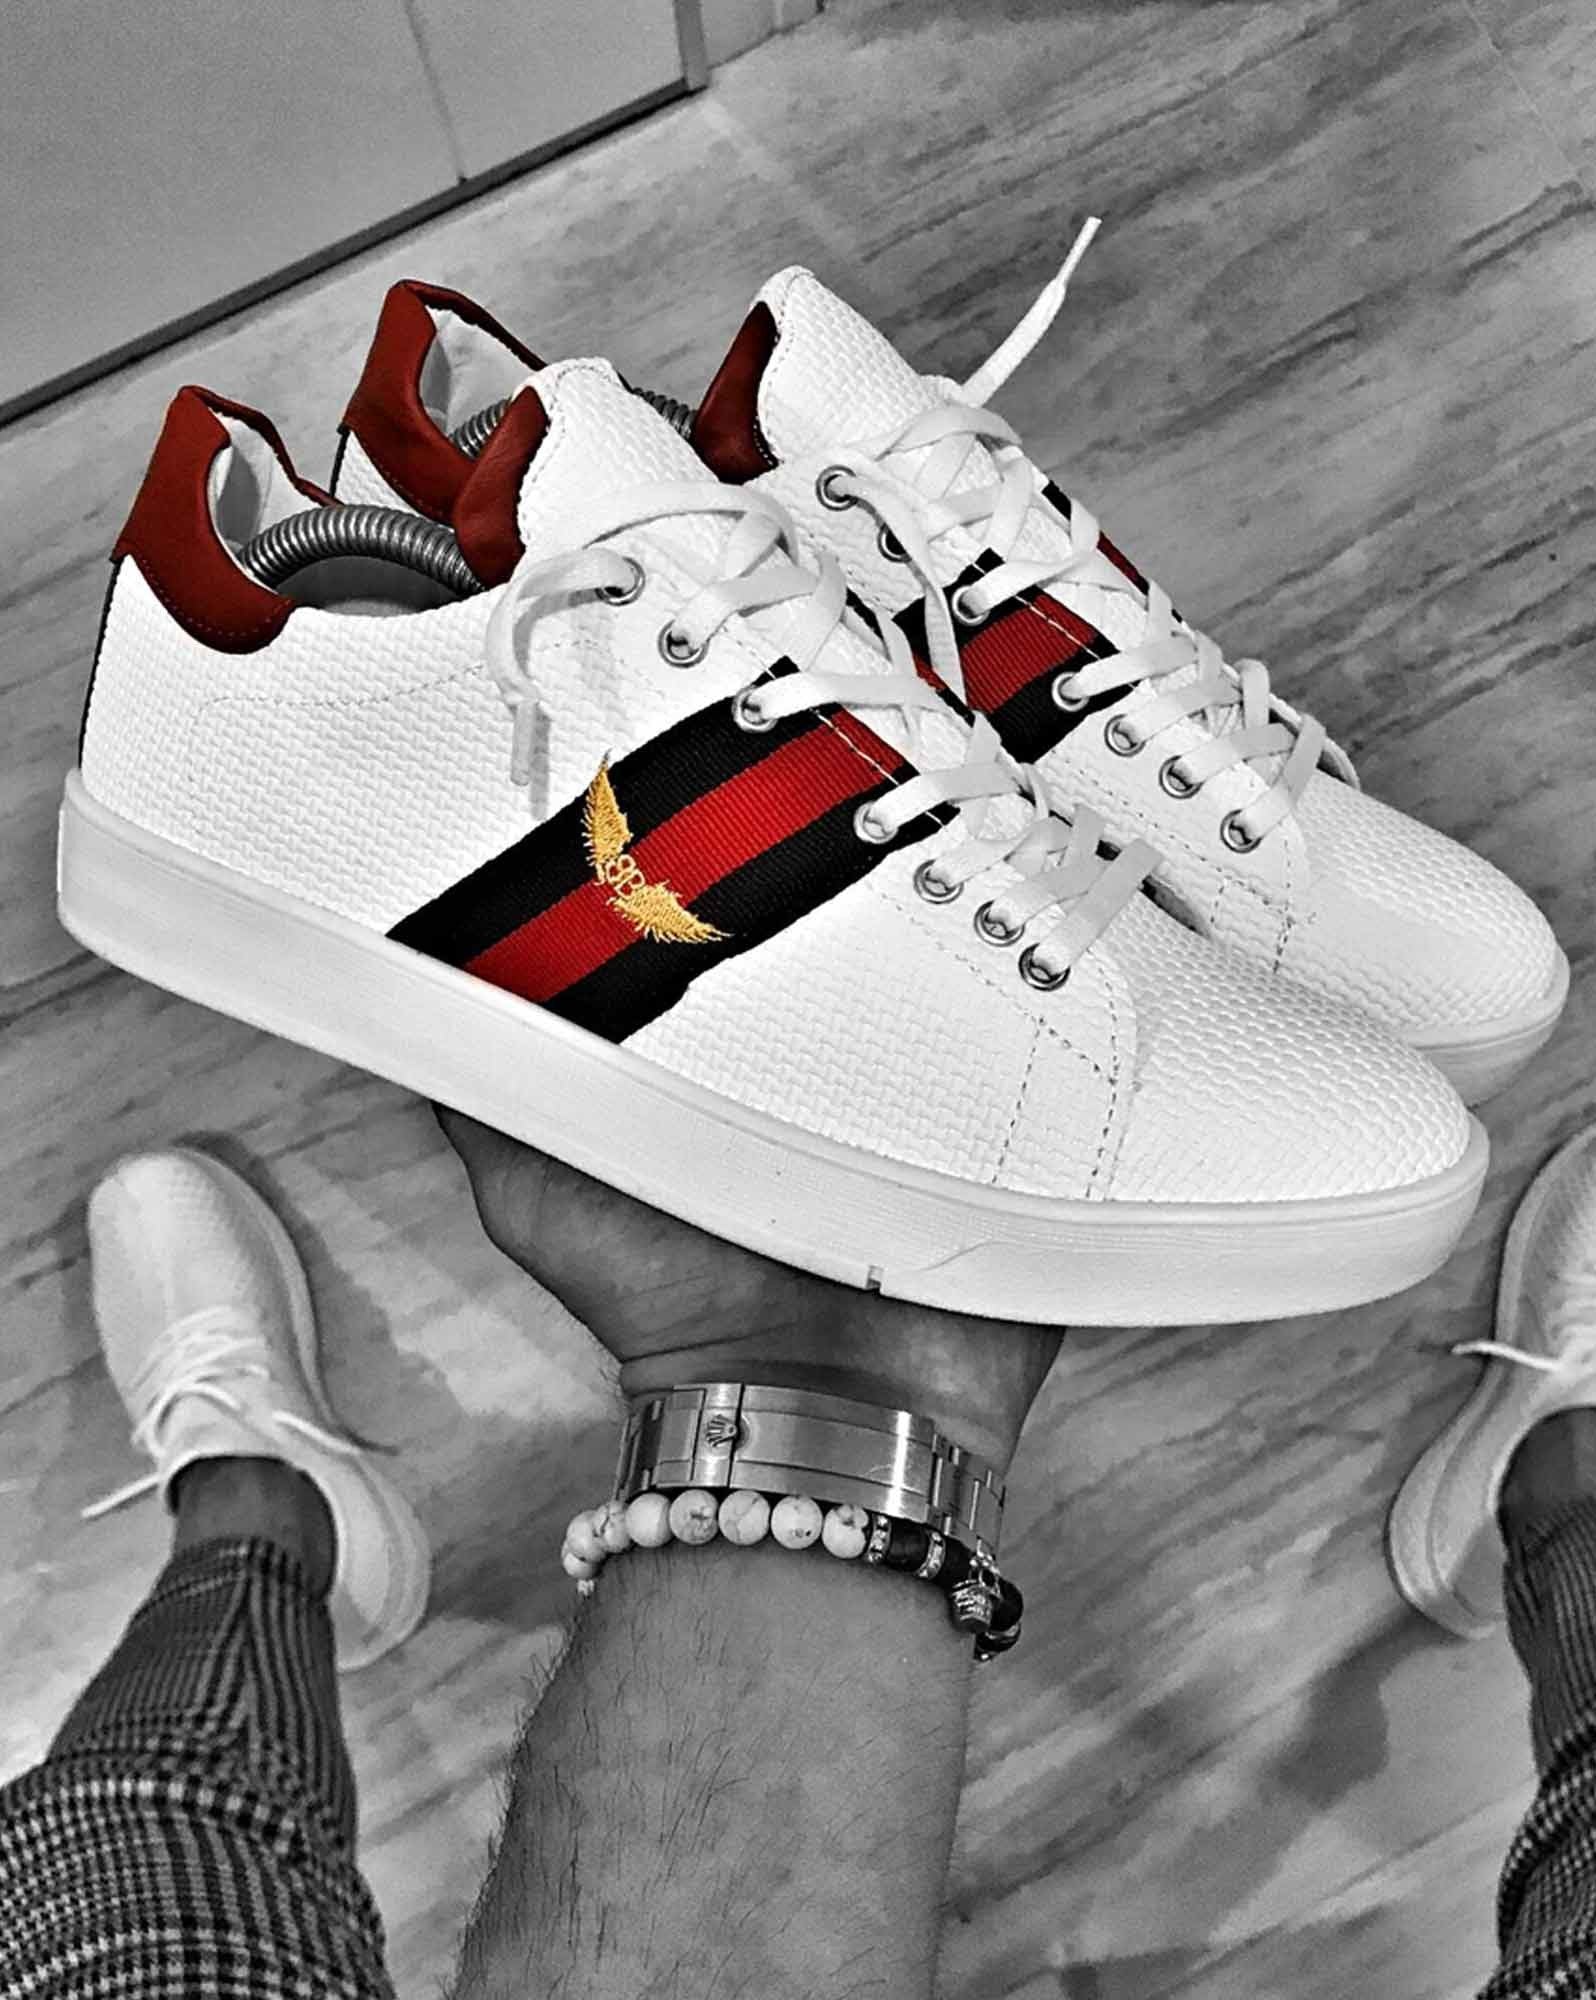 White sneakers with side bands and embroidered wings logo